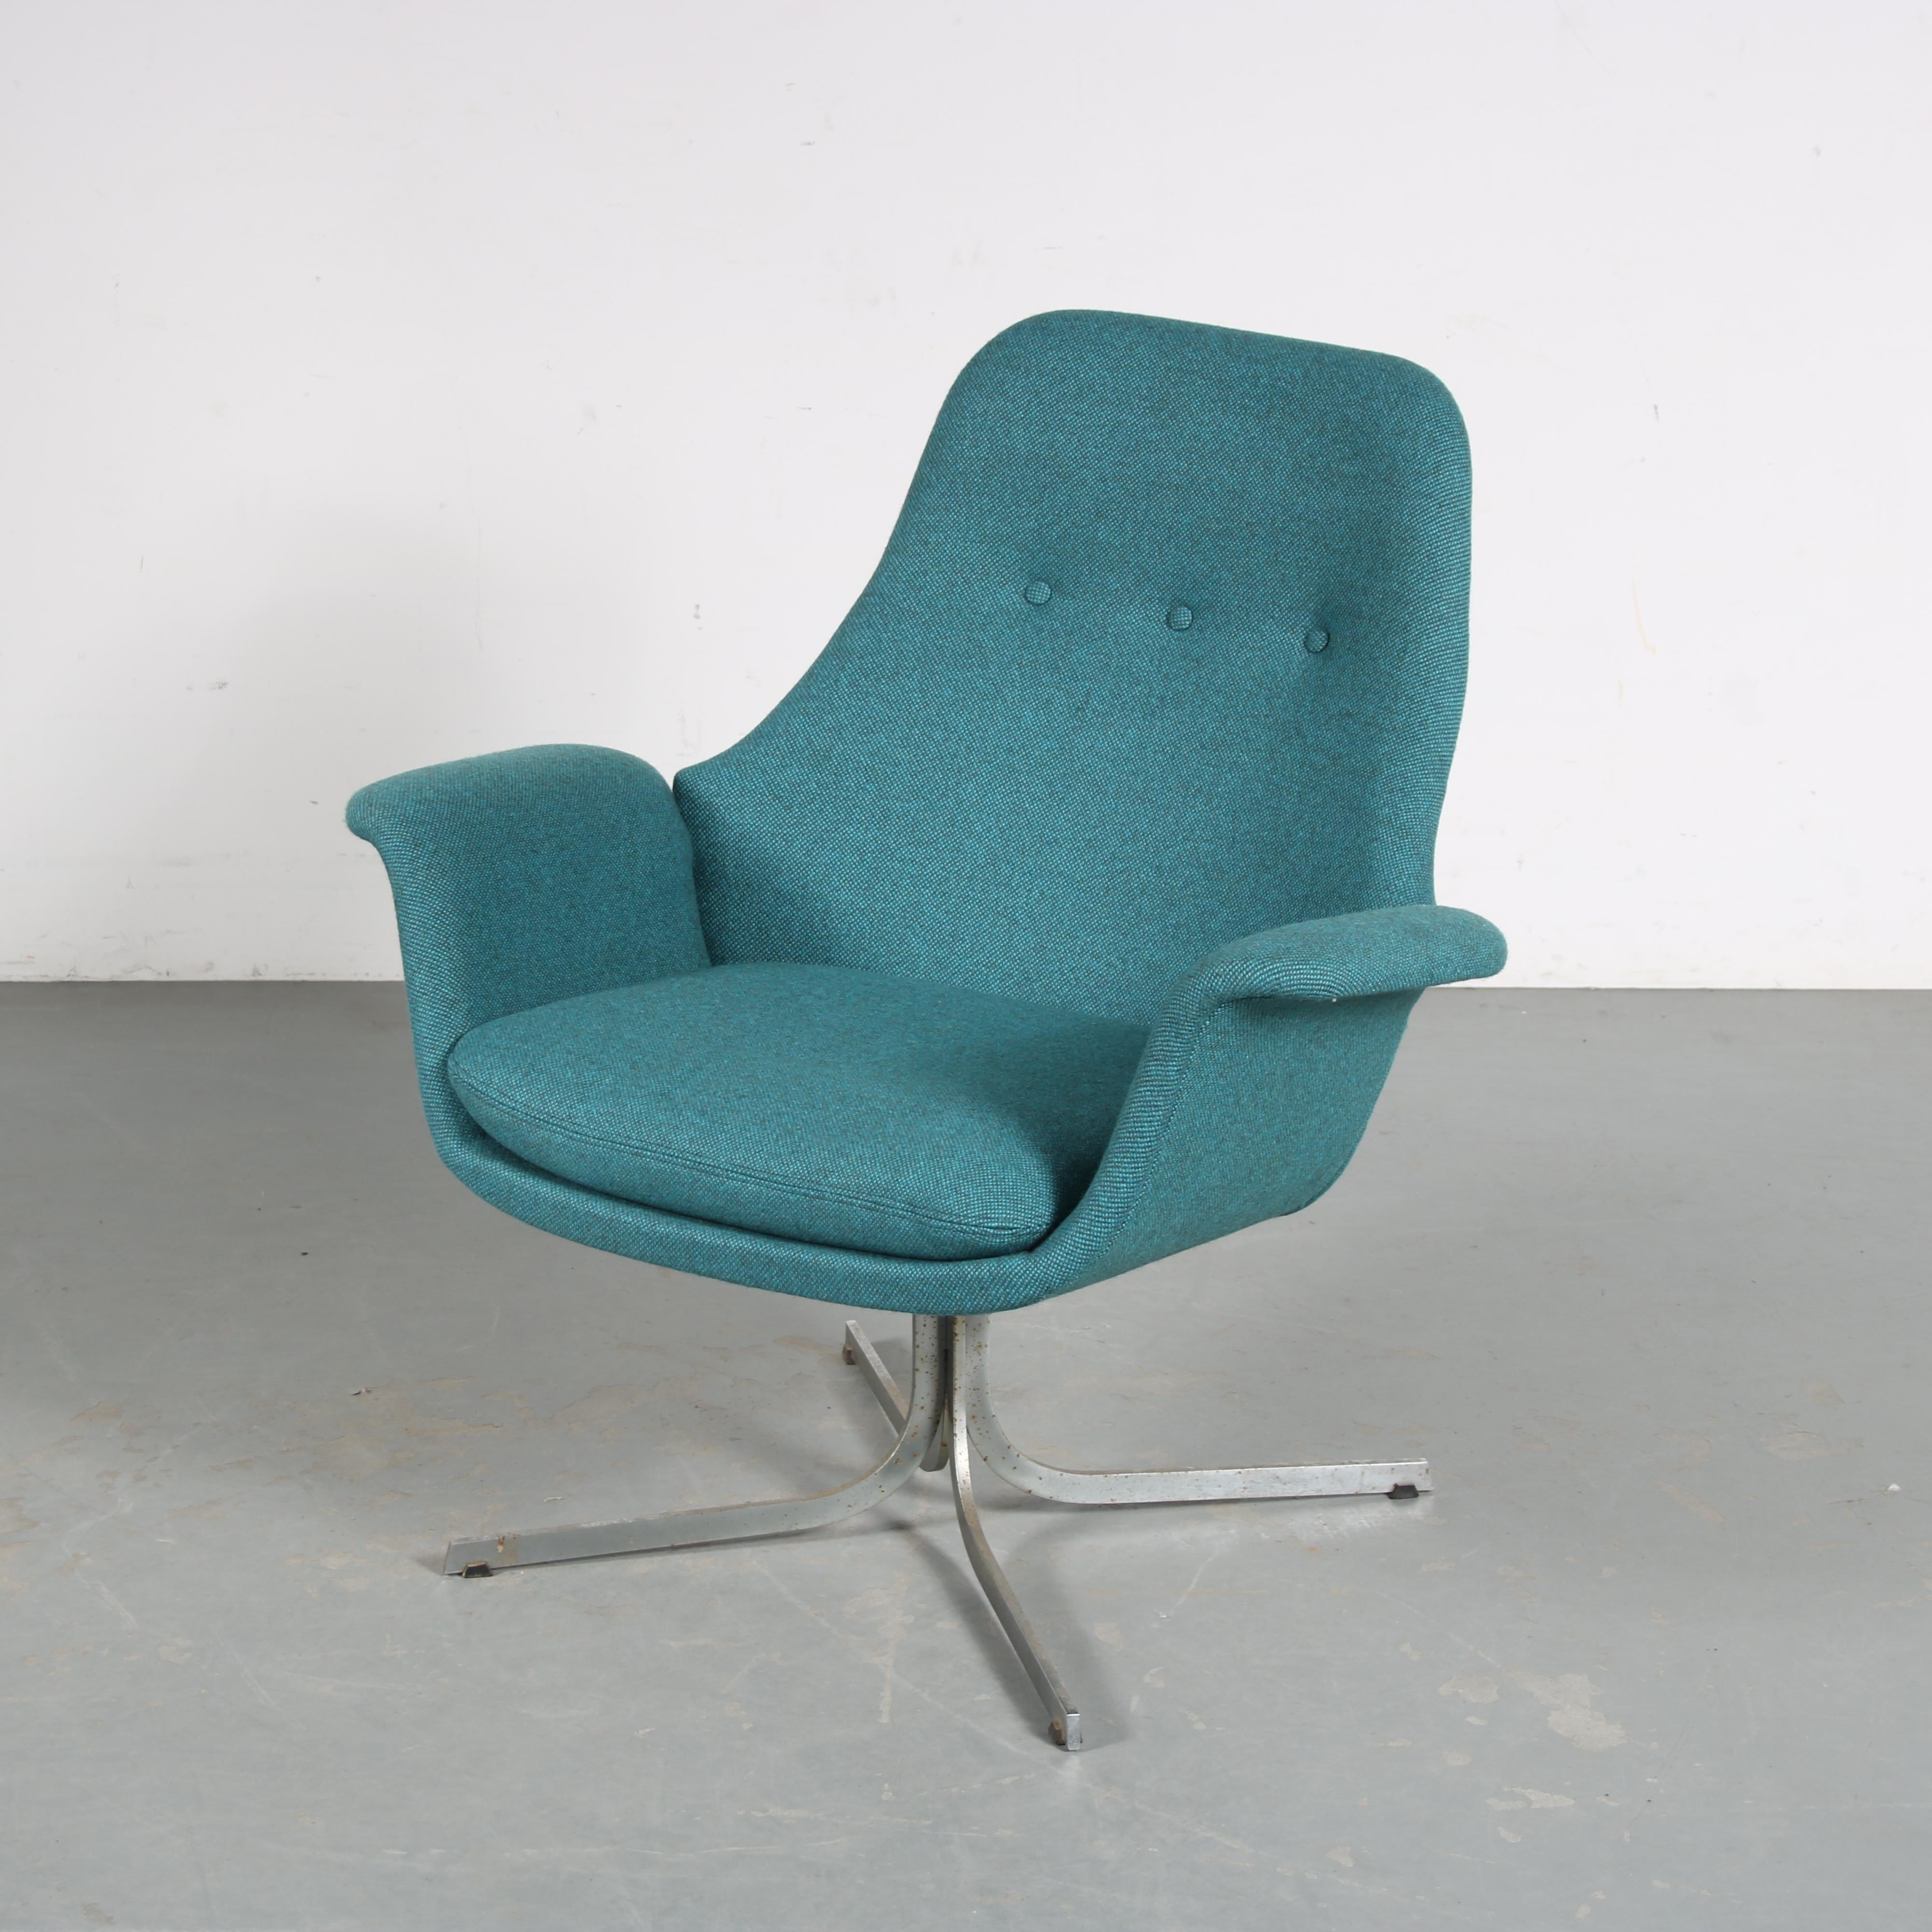 Mid-Century Modern Rare Pierre Paulin Lounge Chair for Artifort, Netherlands 1950 For Sale